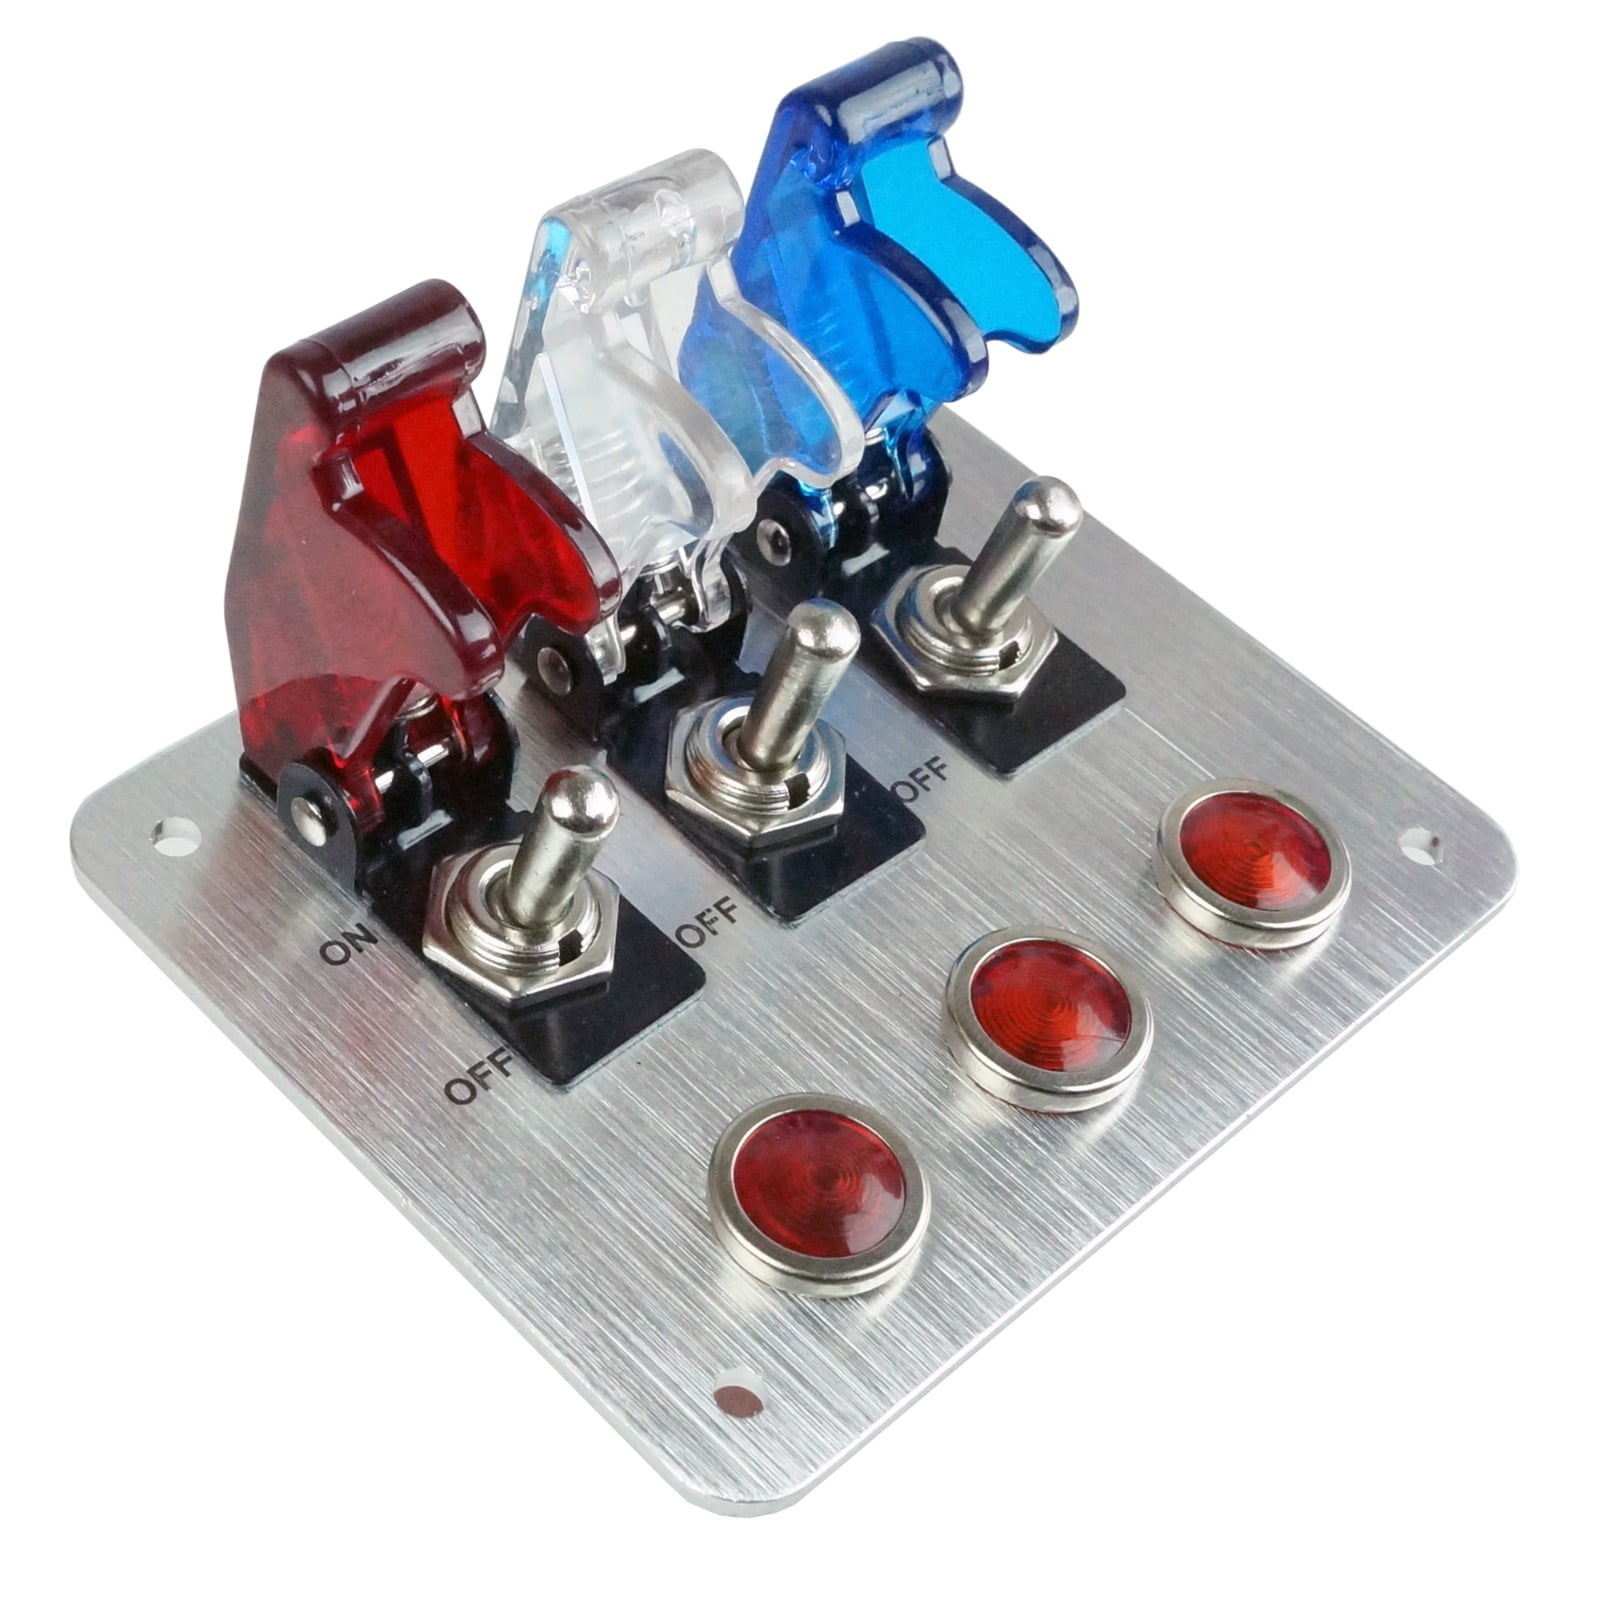 CLEAR RED Designed for 1//2/" Switches Full Size Toggle Switch Safety Cover